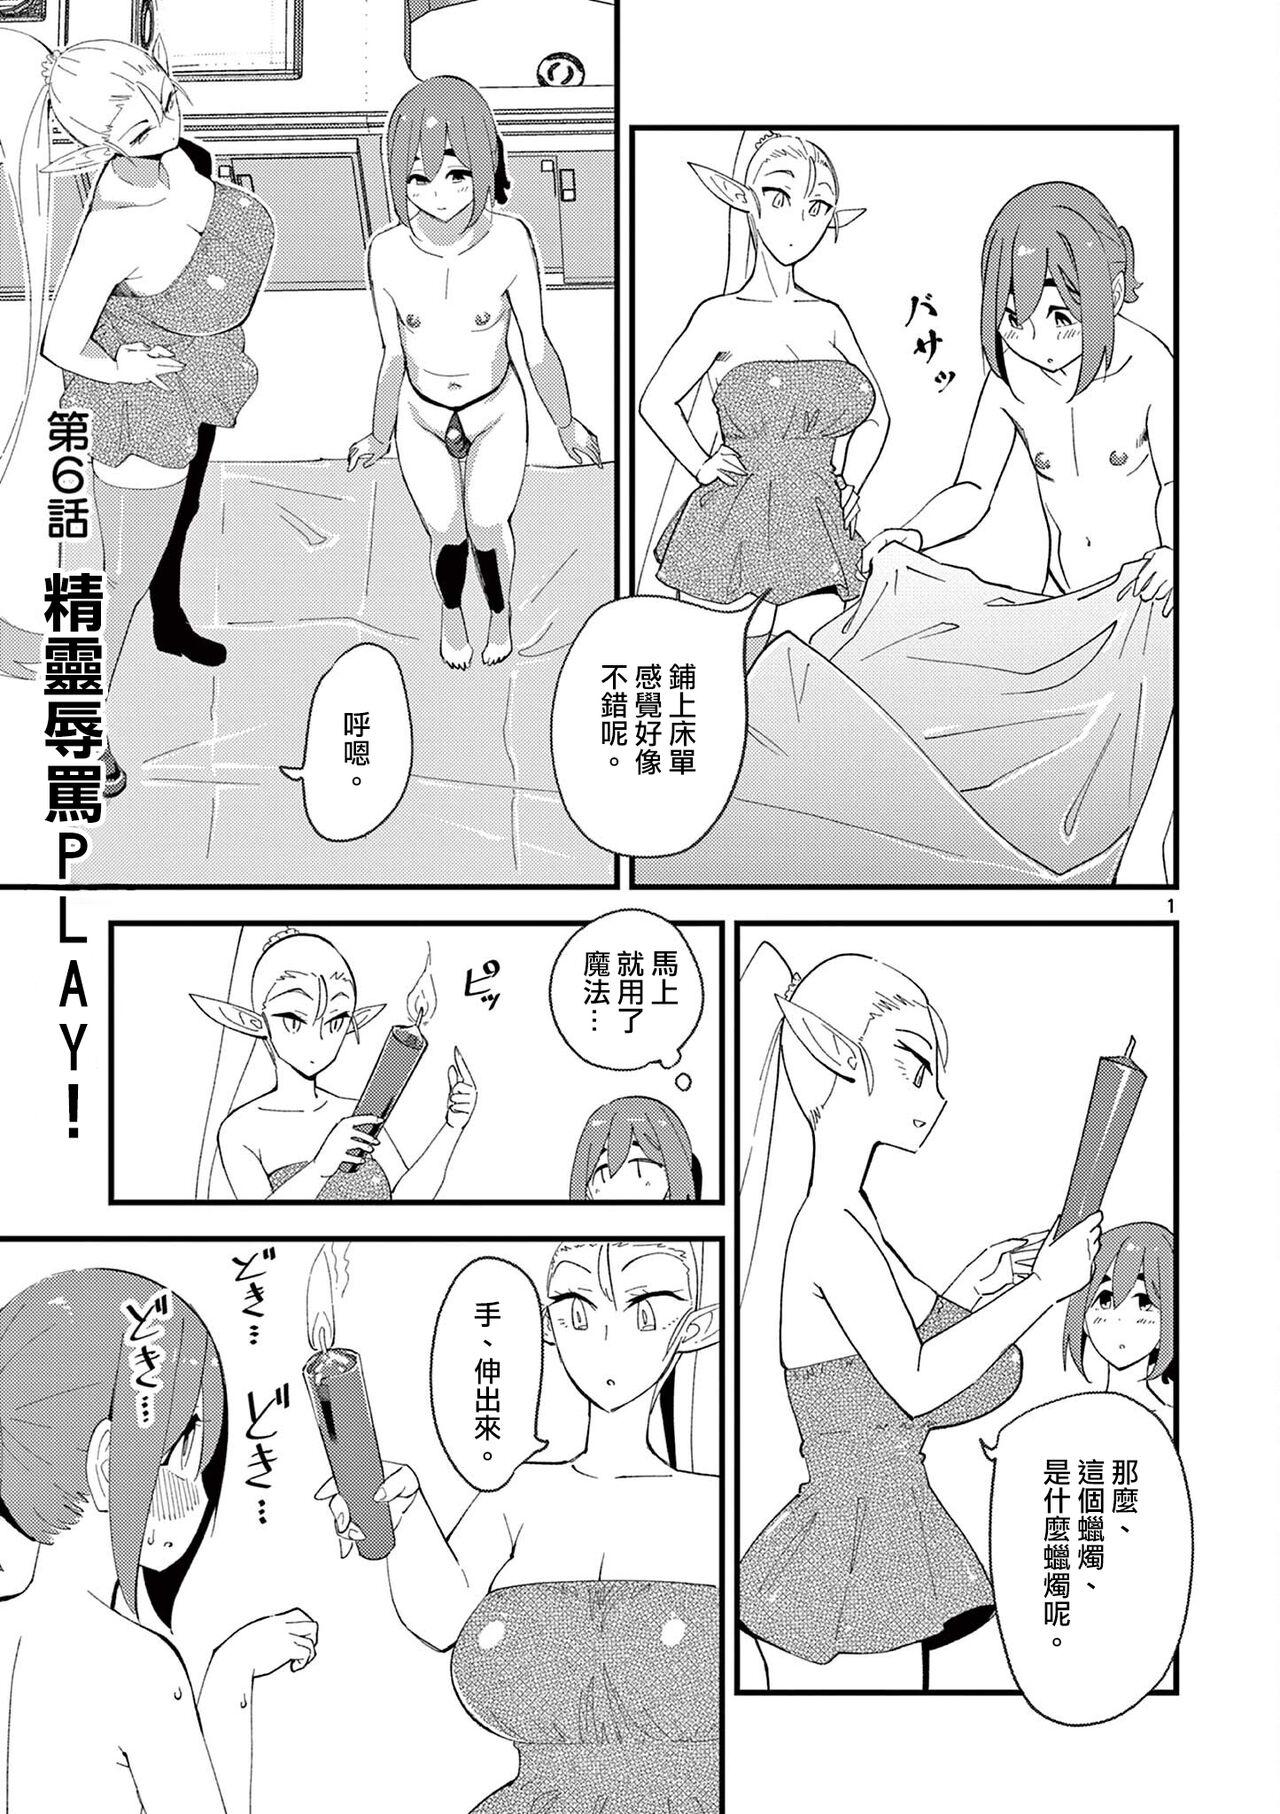 Hermosa 精靈女王大人！ch6 Uncensored - Page 2